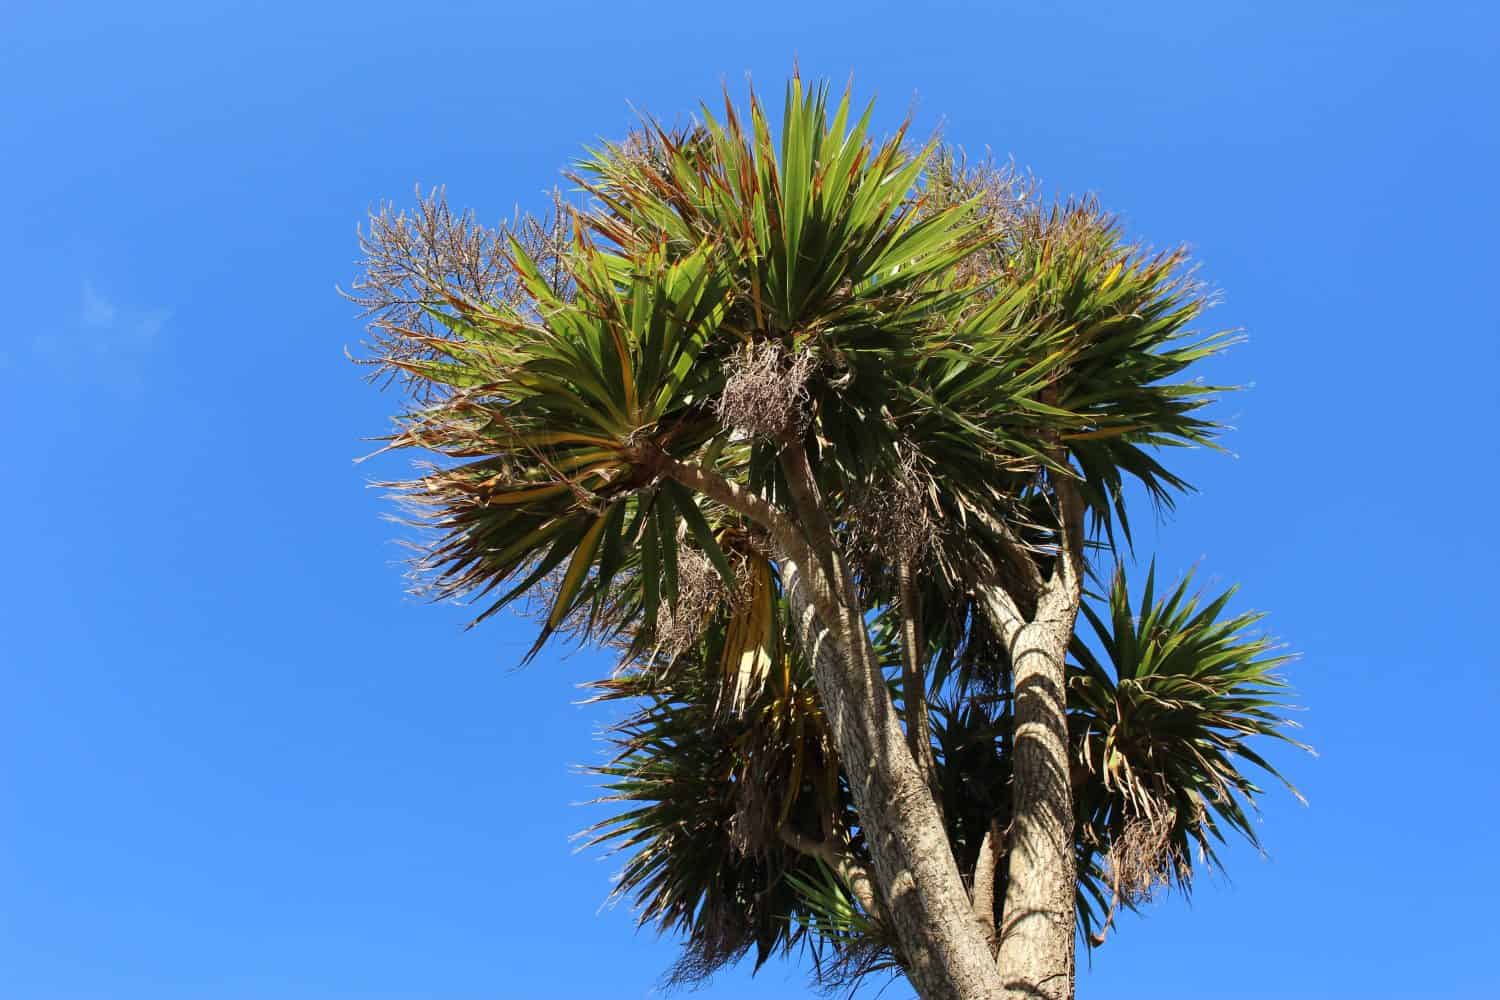 Cordyline australis - New Zealand cabbage tree - isolated against a clear blue sky outdoors on a sunny day in summer